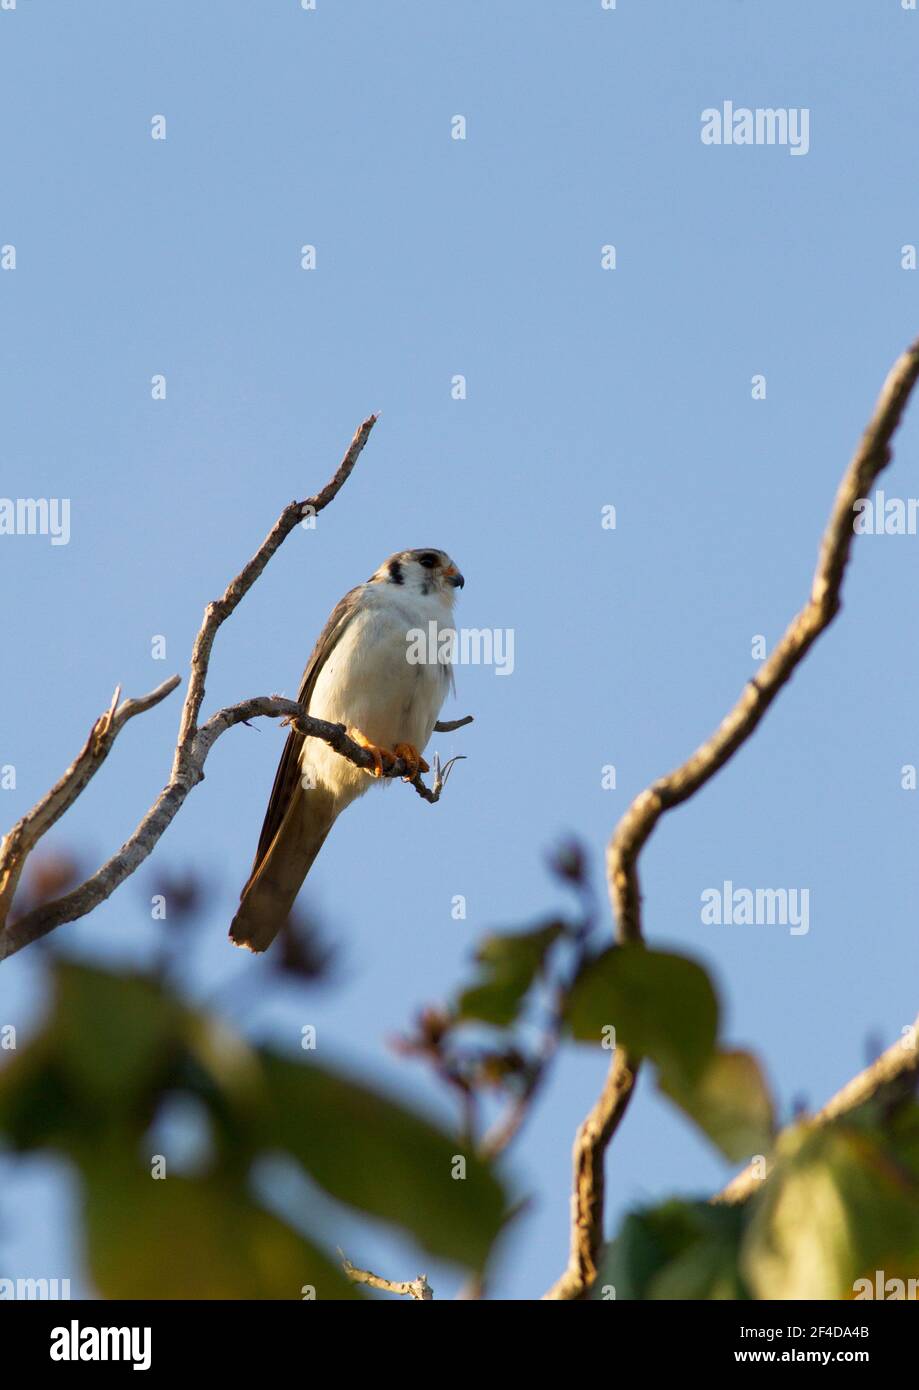 Amercan Kestrel, Falco sparverius, single adult male, white morph, perched in tree, Cuba Stock Photo